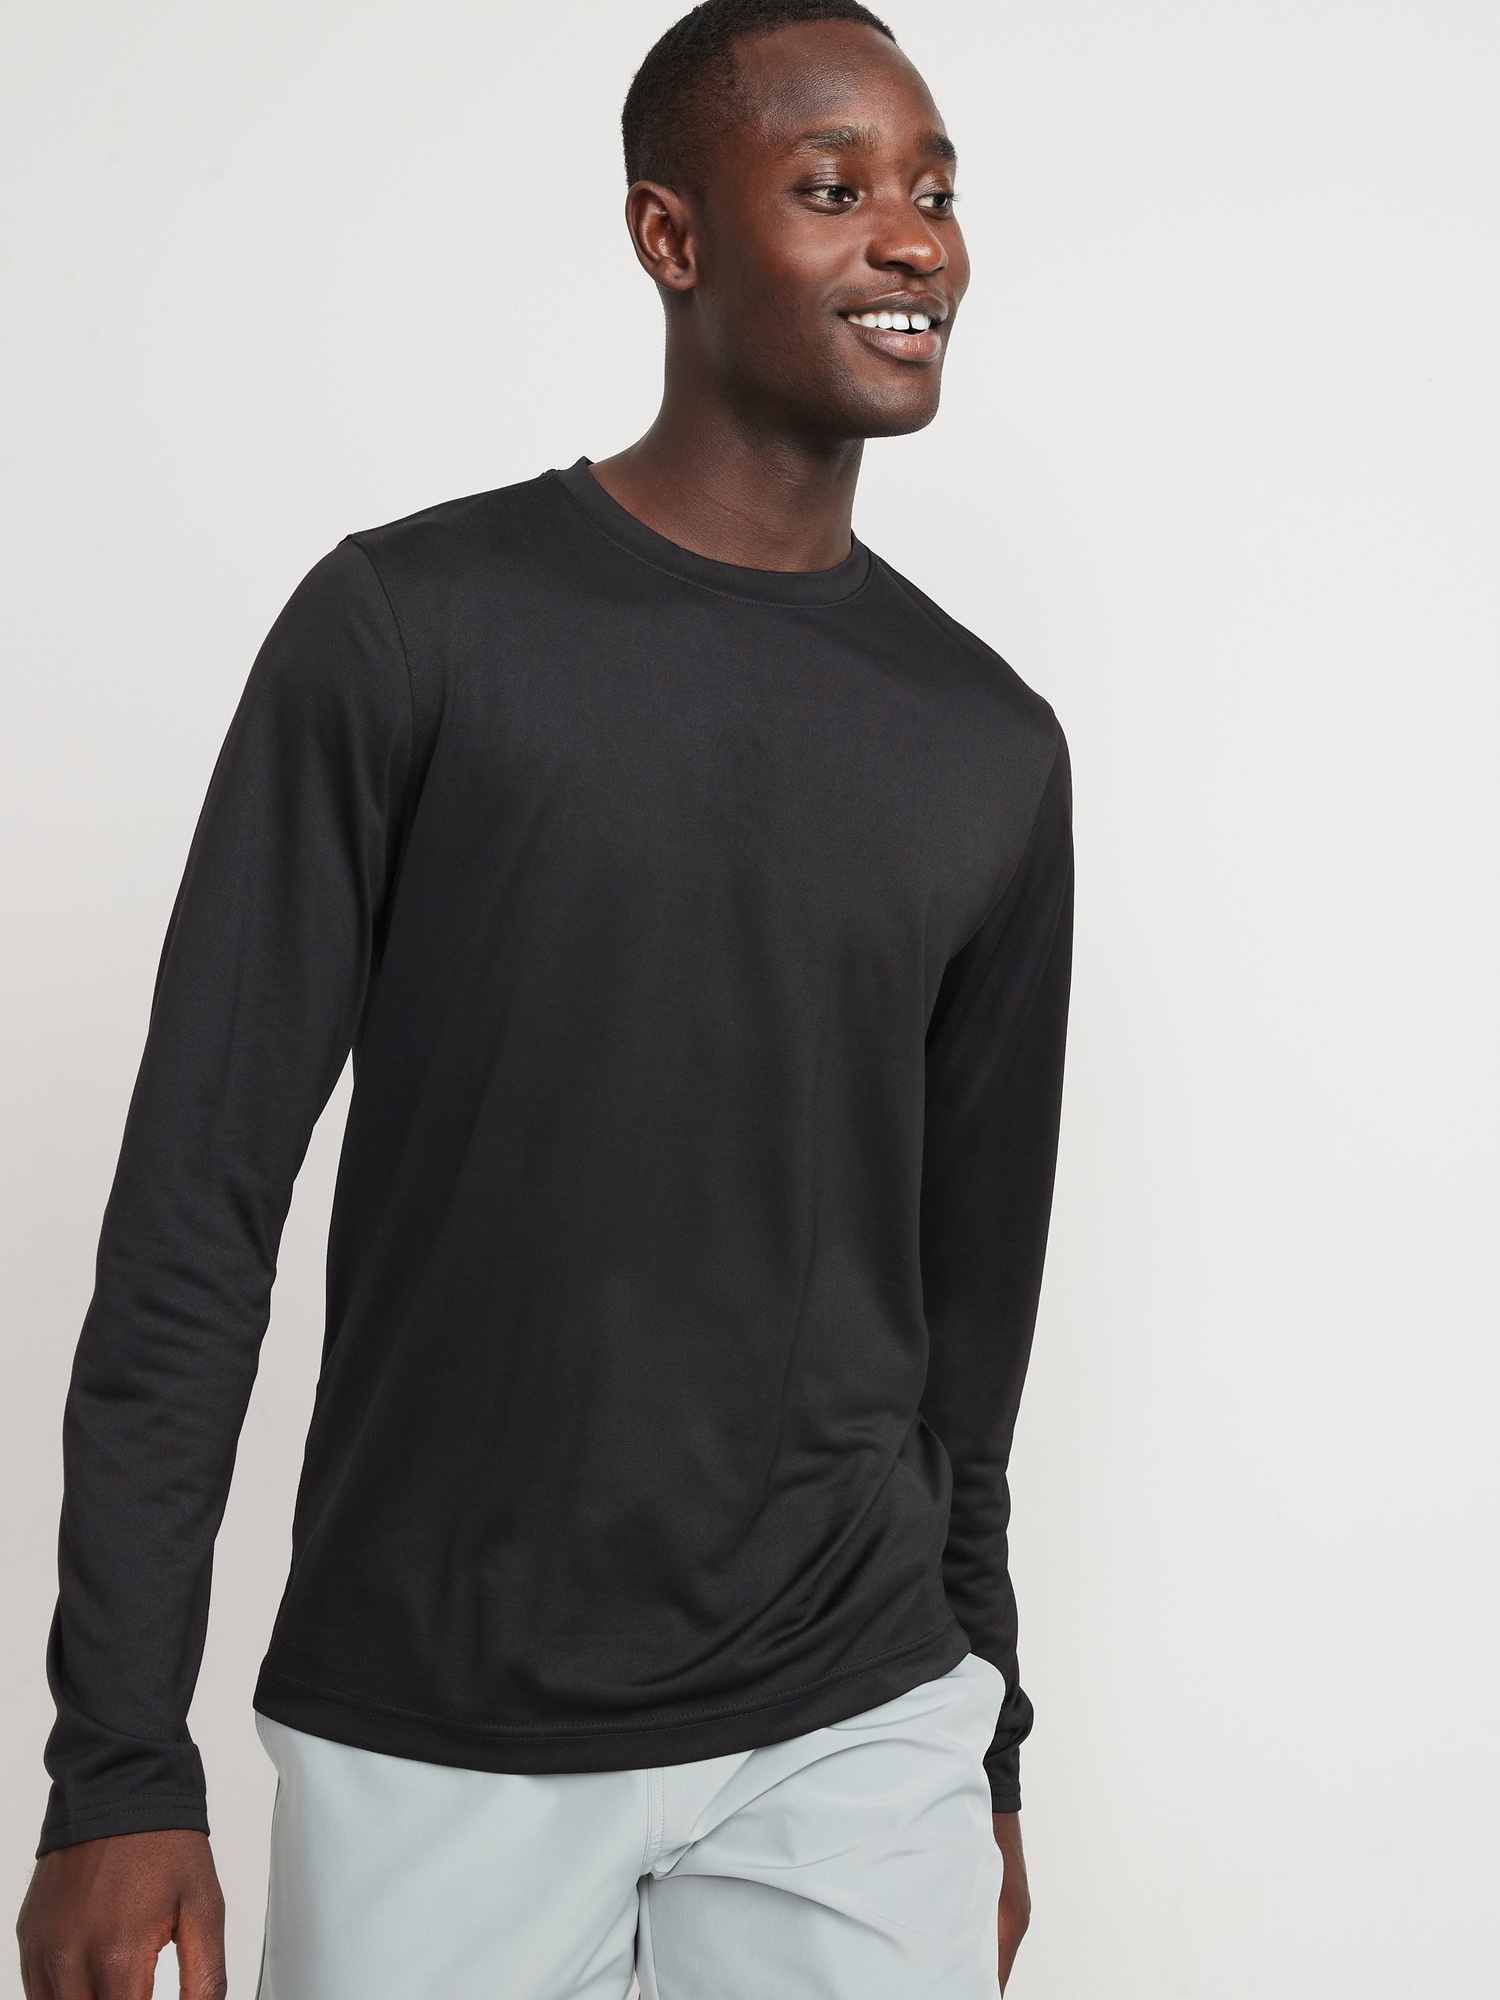 Old Navy Go-Dry Cool Odor-Control Core Long-Sleeve T-Shirt for Men black. 1